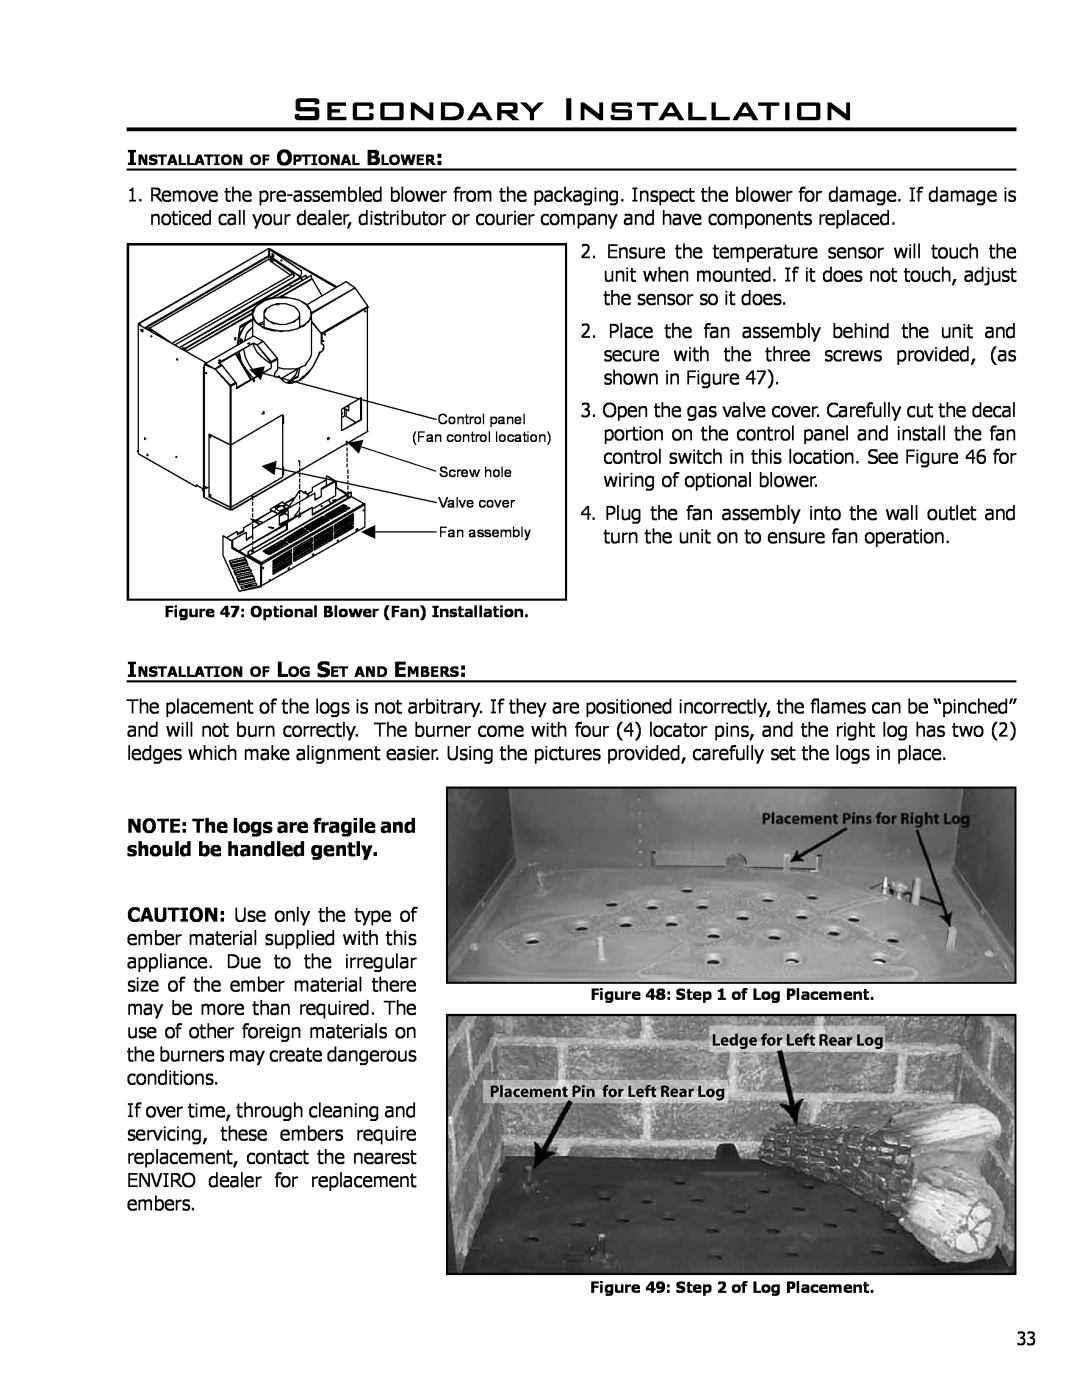 Enviro C-10794 owner manual Secondary Installation, Optional Blower Fan Installation, of Log Placement 